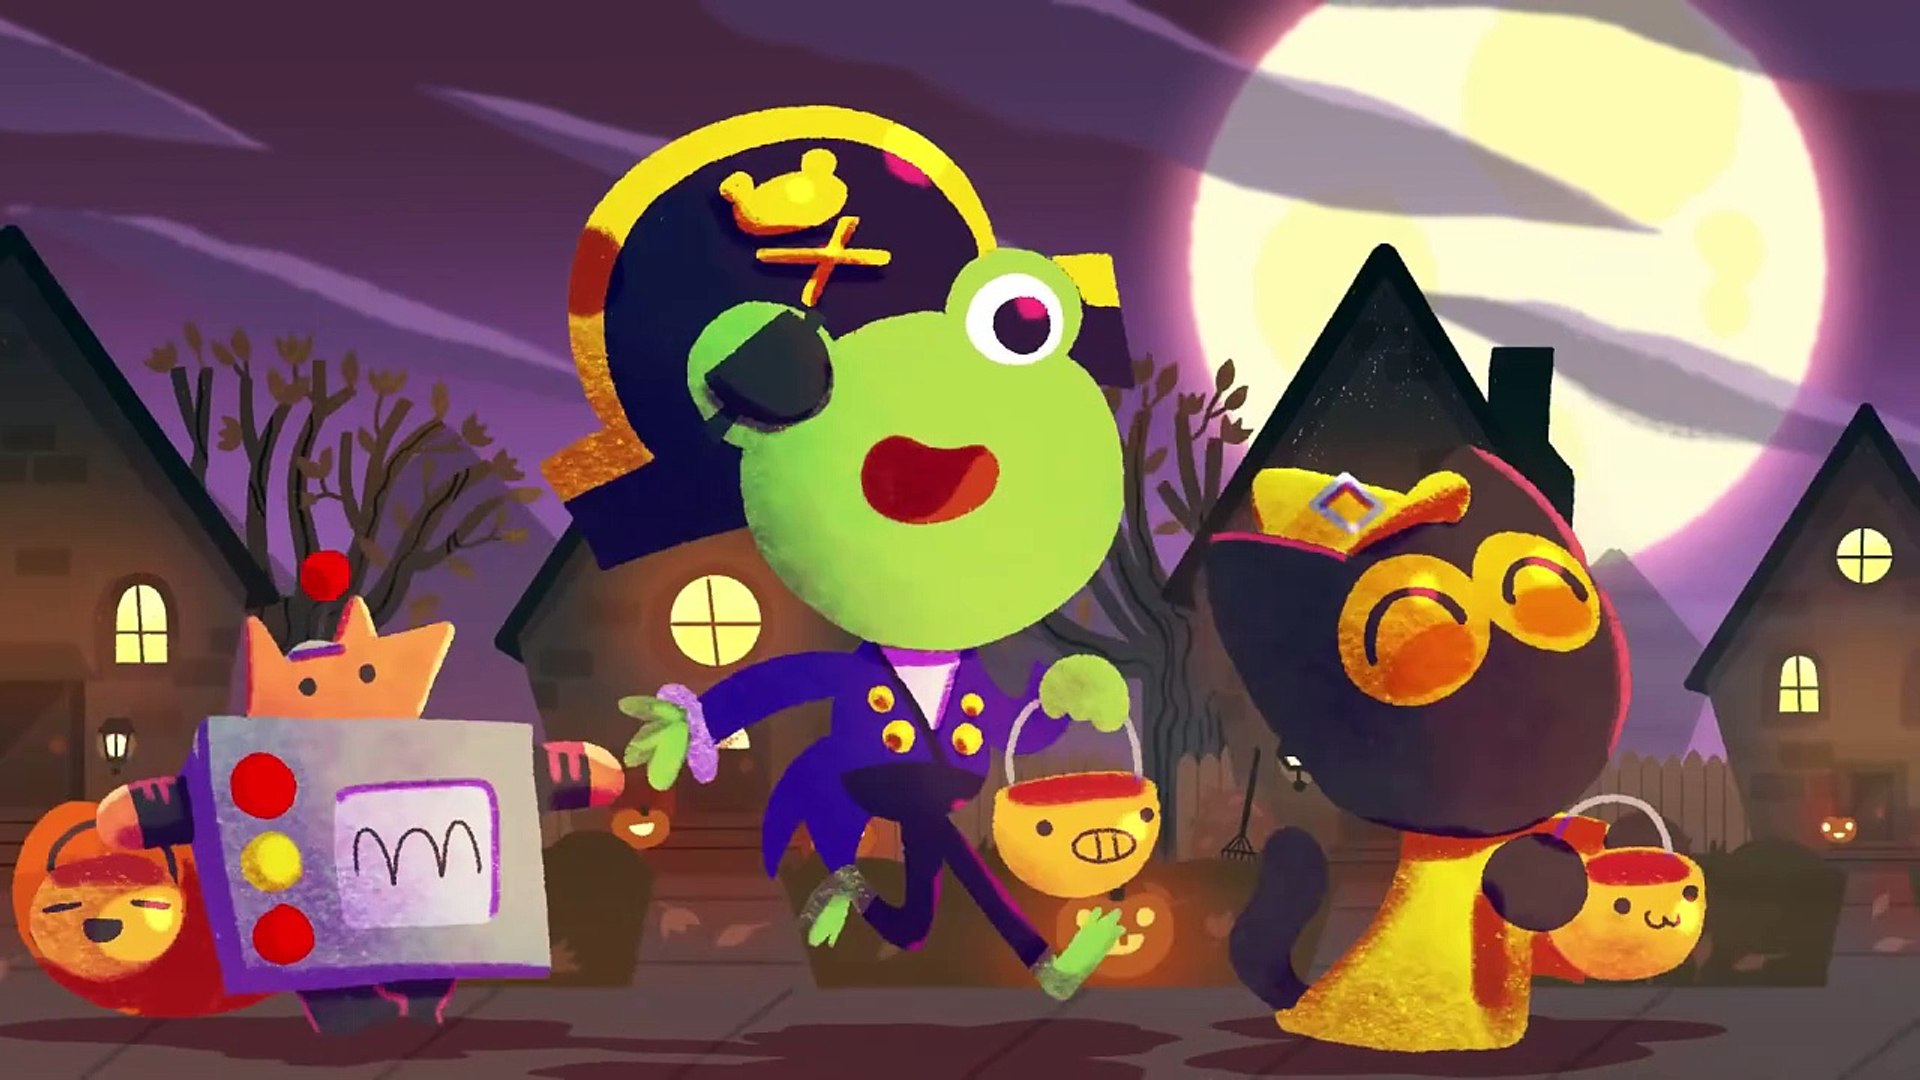 Halloween 2017: Google joins in celebrations with an adorable